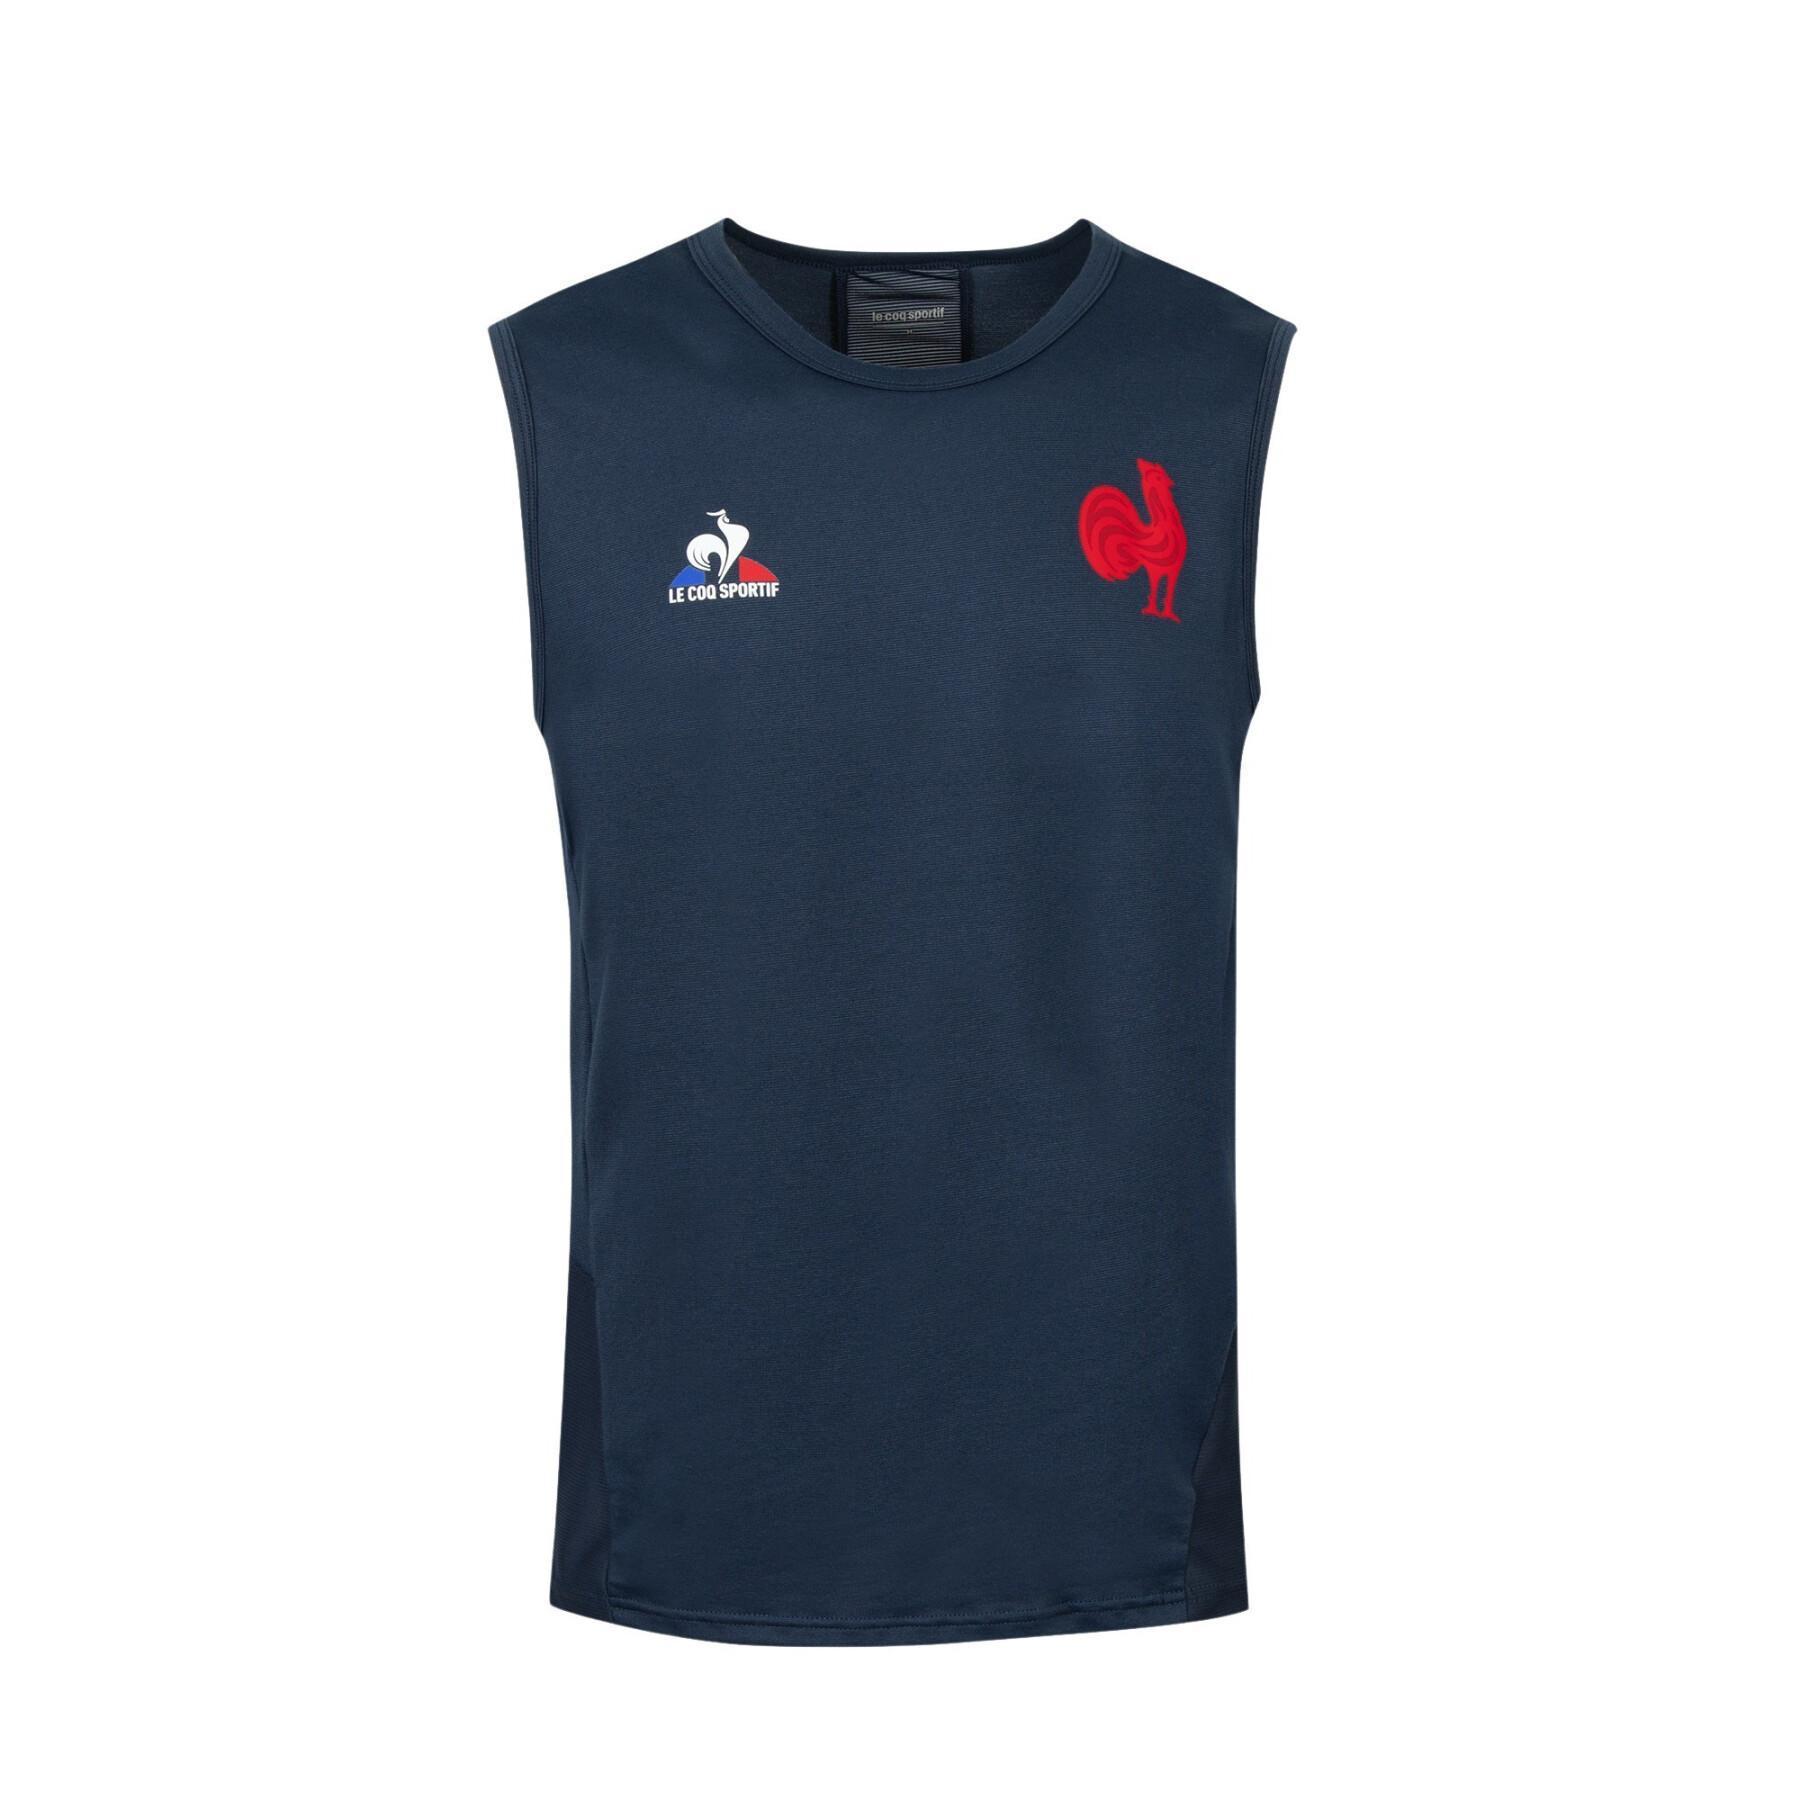 xv tank top from France 2021/22